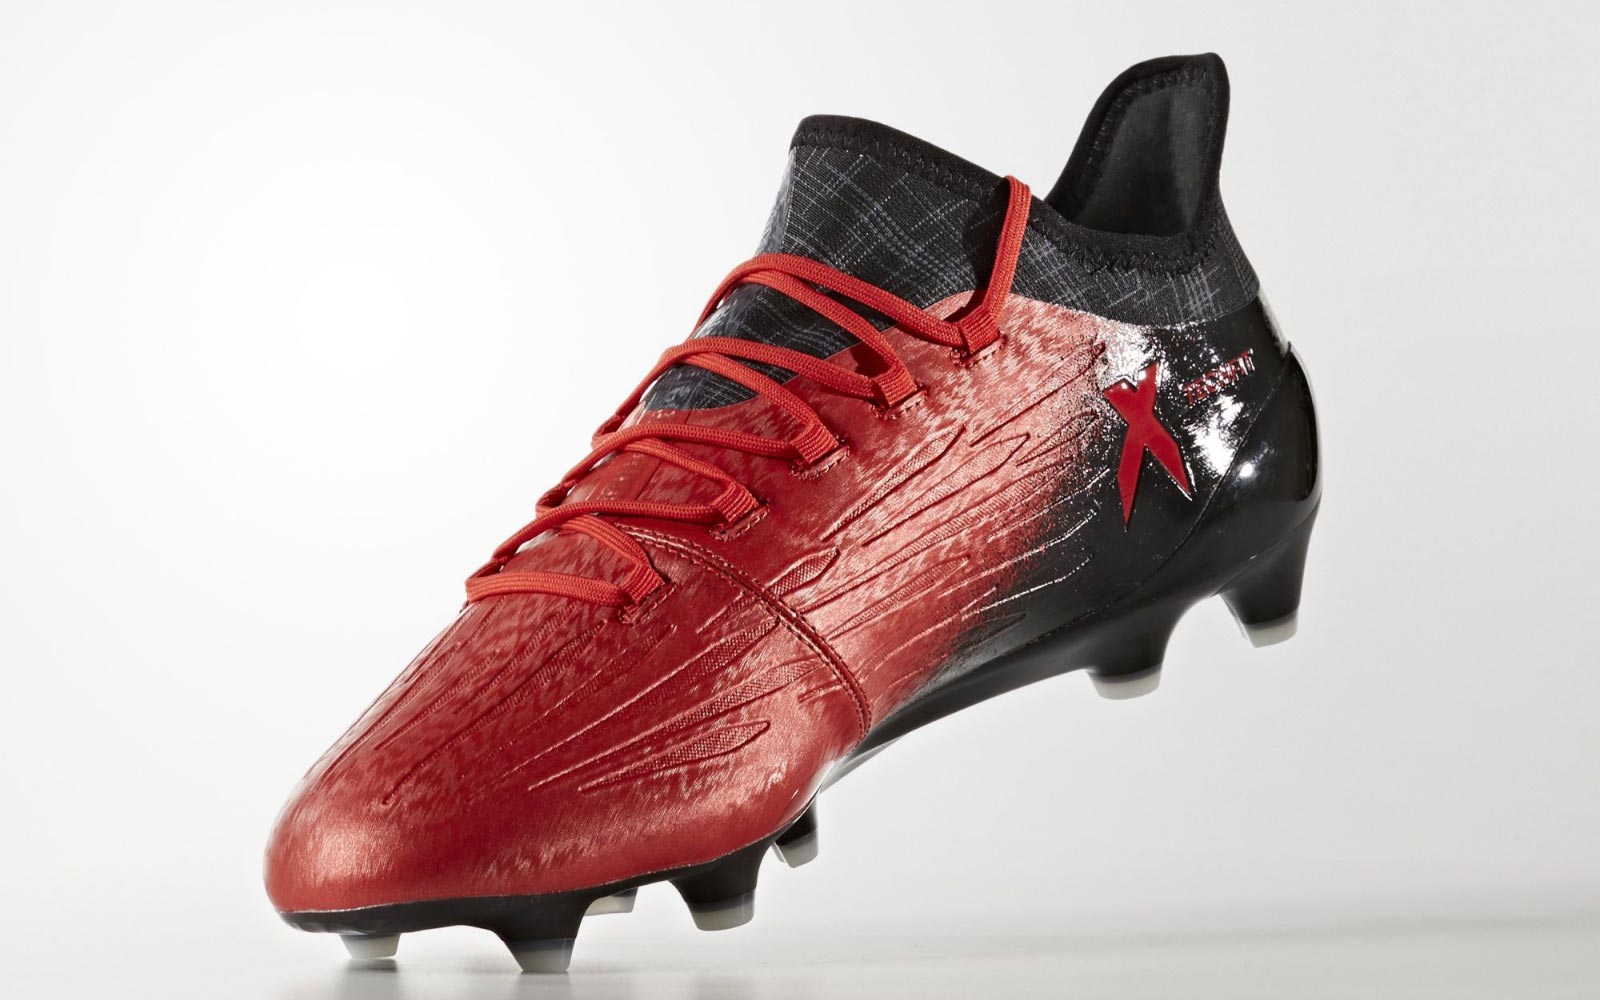 Adidas X 16 Red Boots Revealed - Footy Headlines